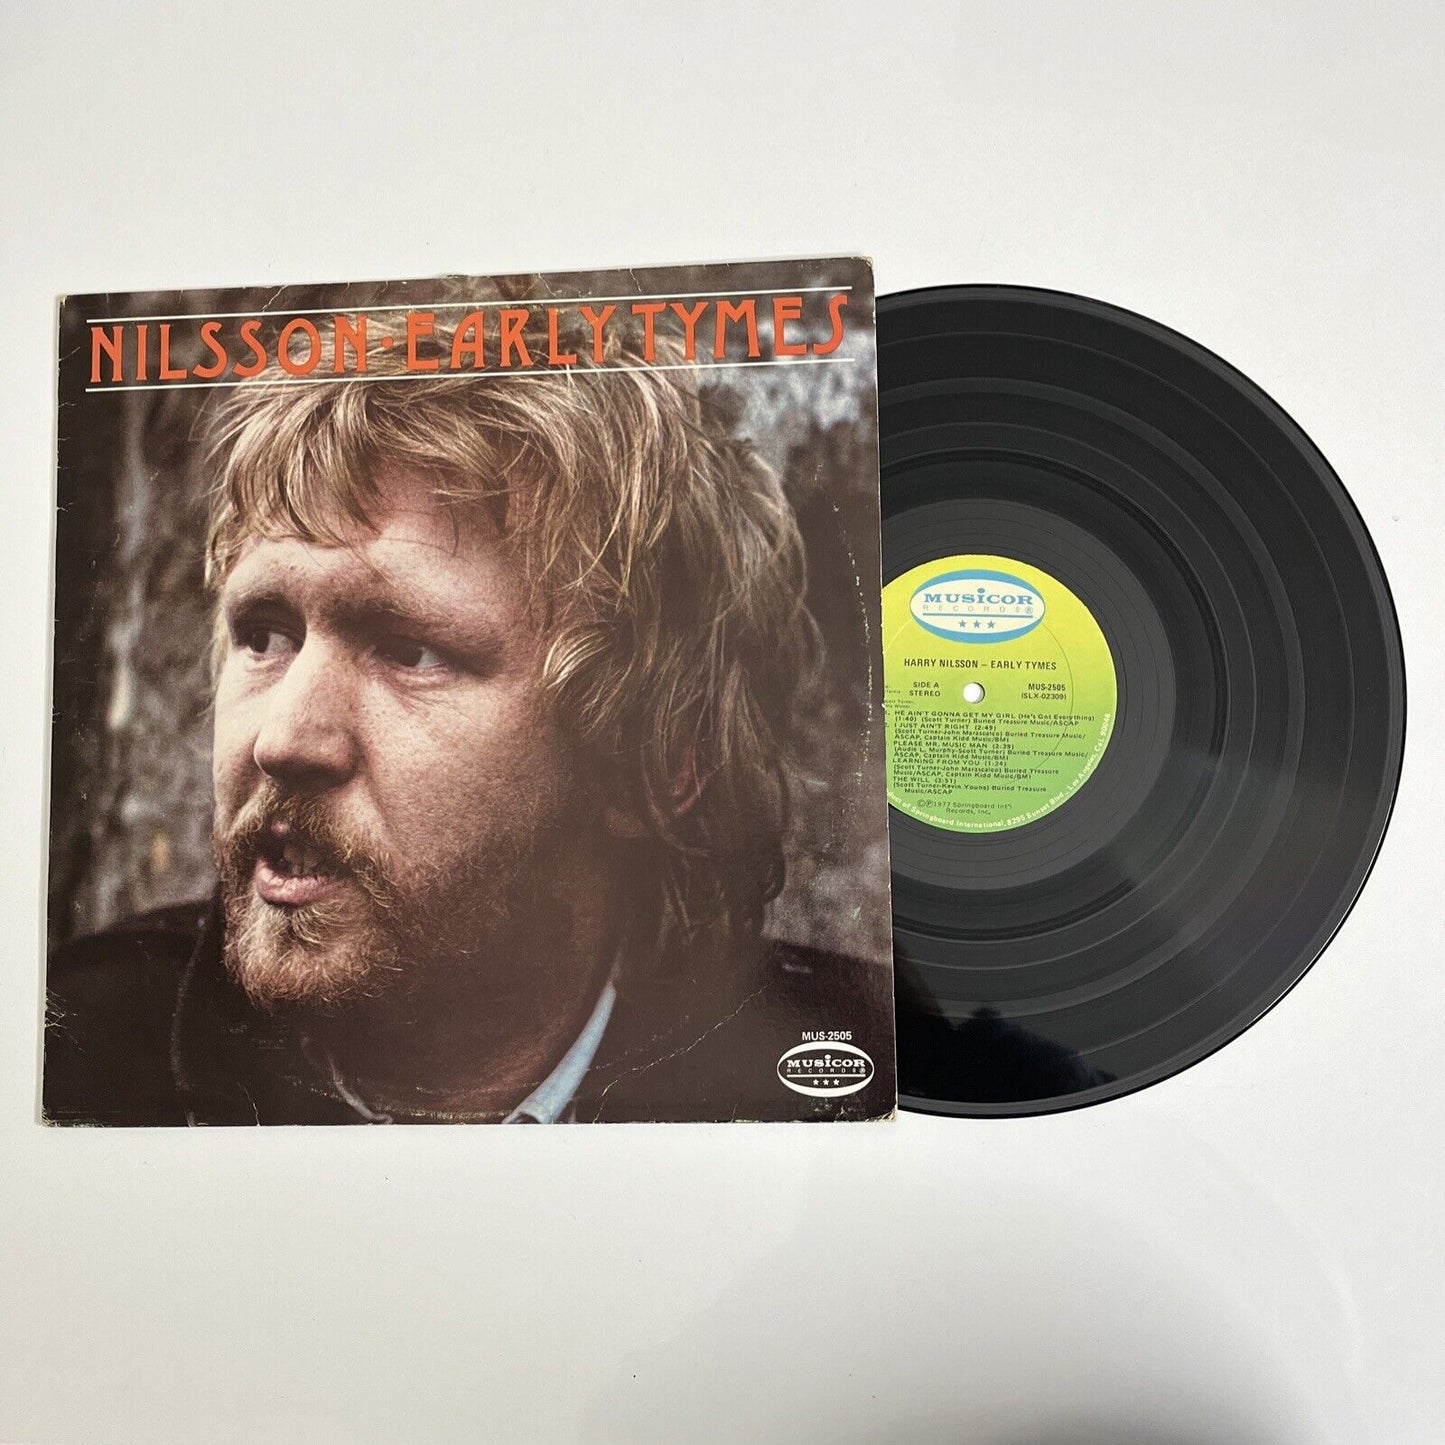 Harry Nilsson - Early Times LP 1977 Vinyl Record MUS-2505